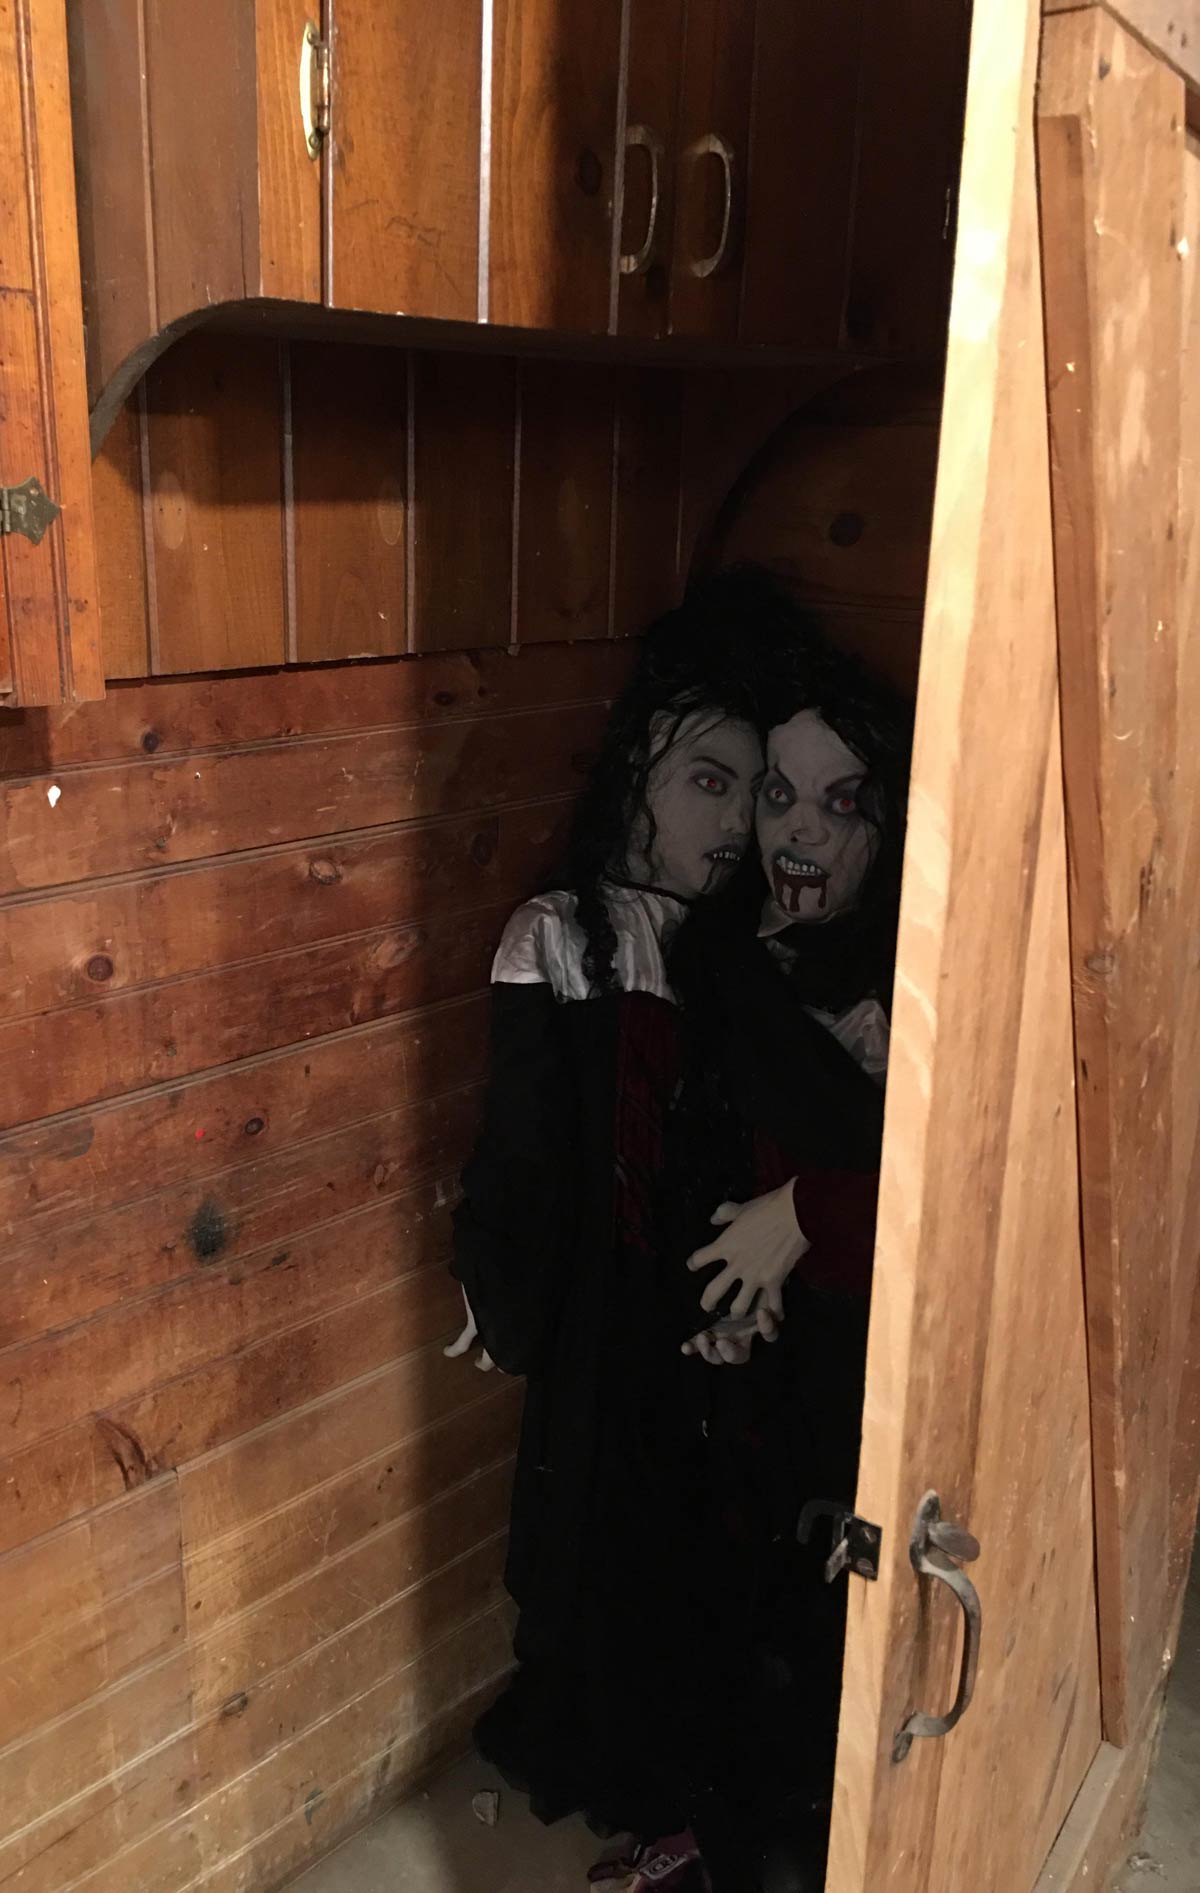 My wife put these Halloween decorations behind a door in our basement, now I need new underwear